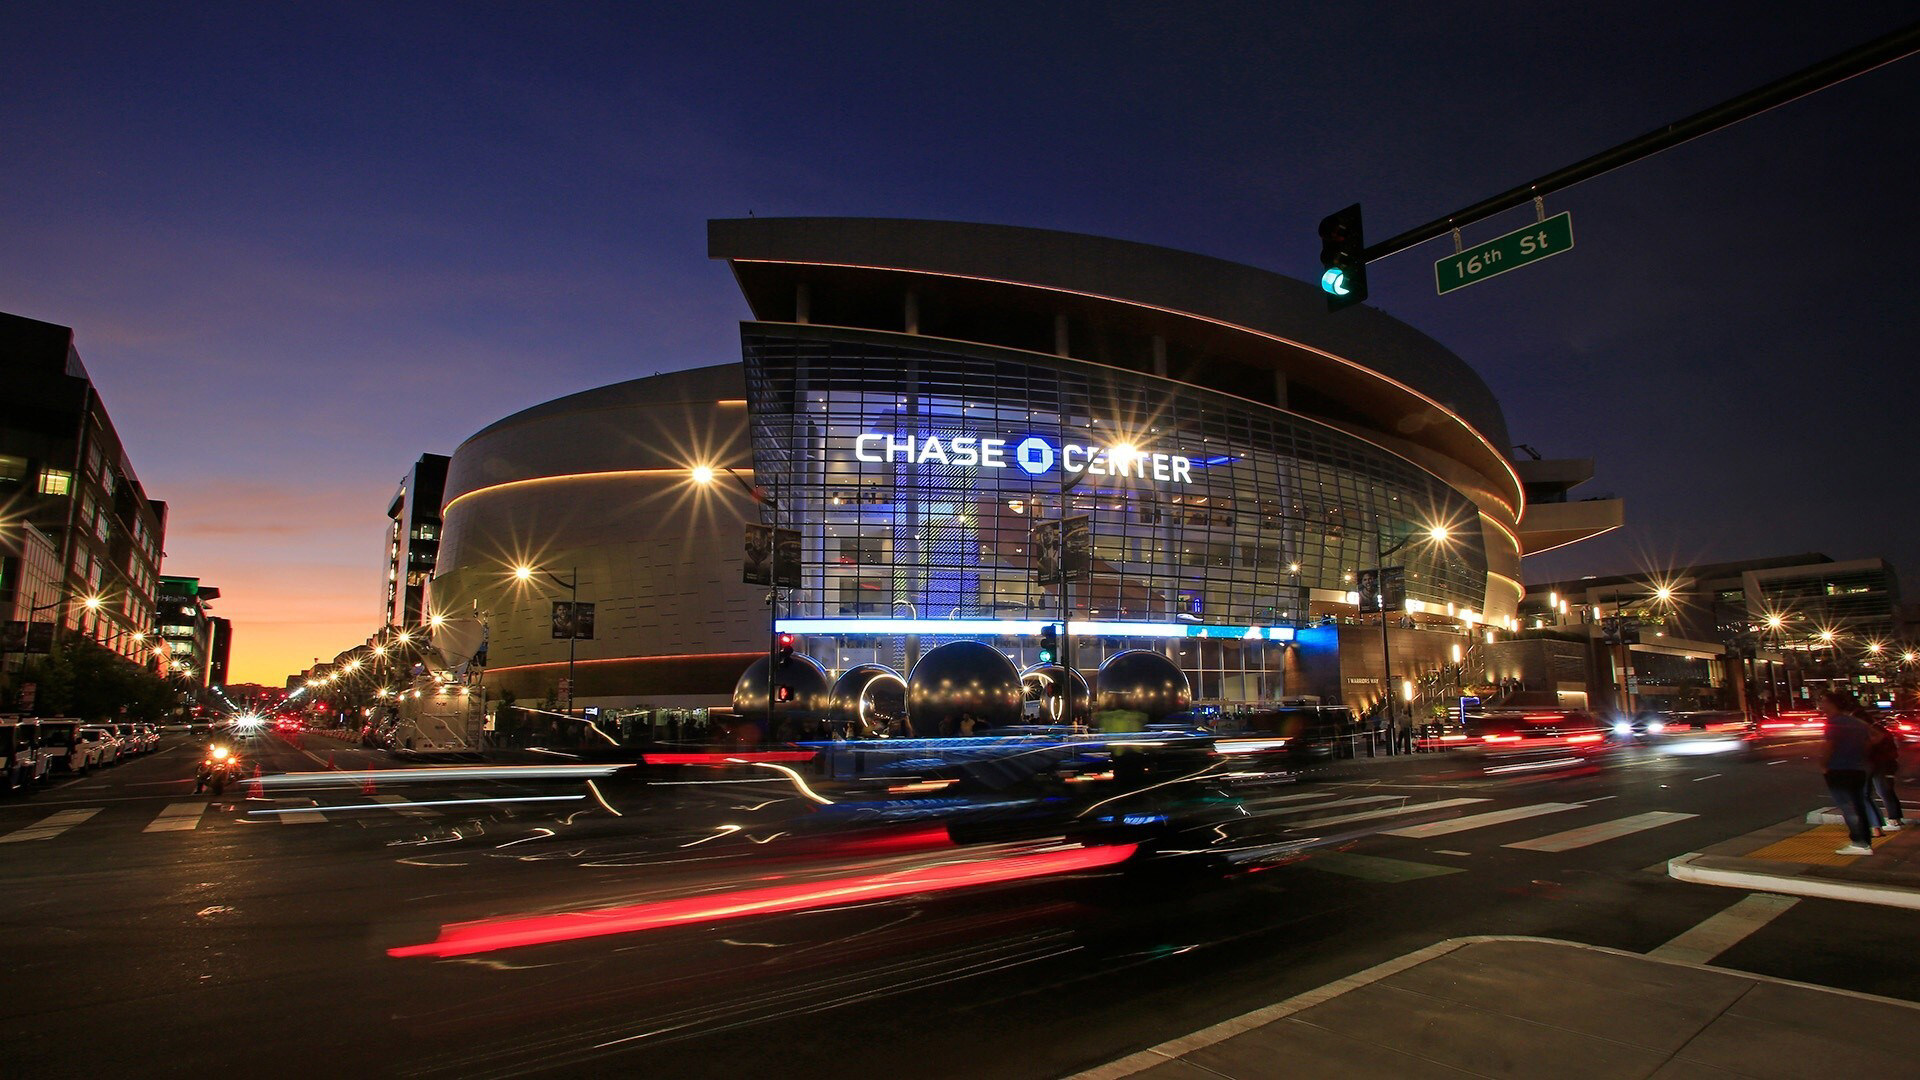 It's official 2025 NBA AllStar Game coming to Chase Center in San